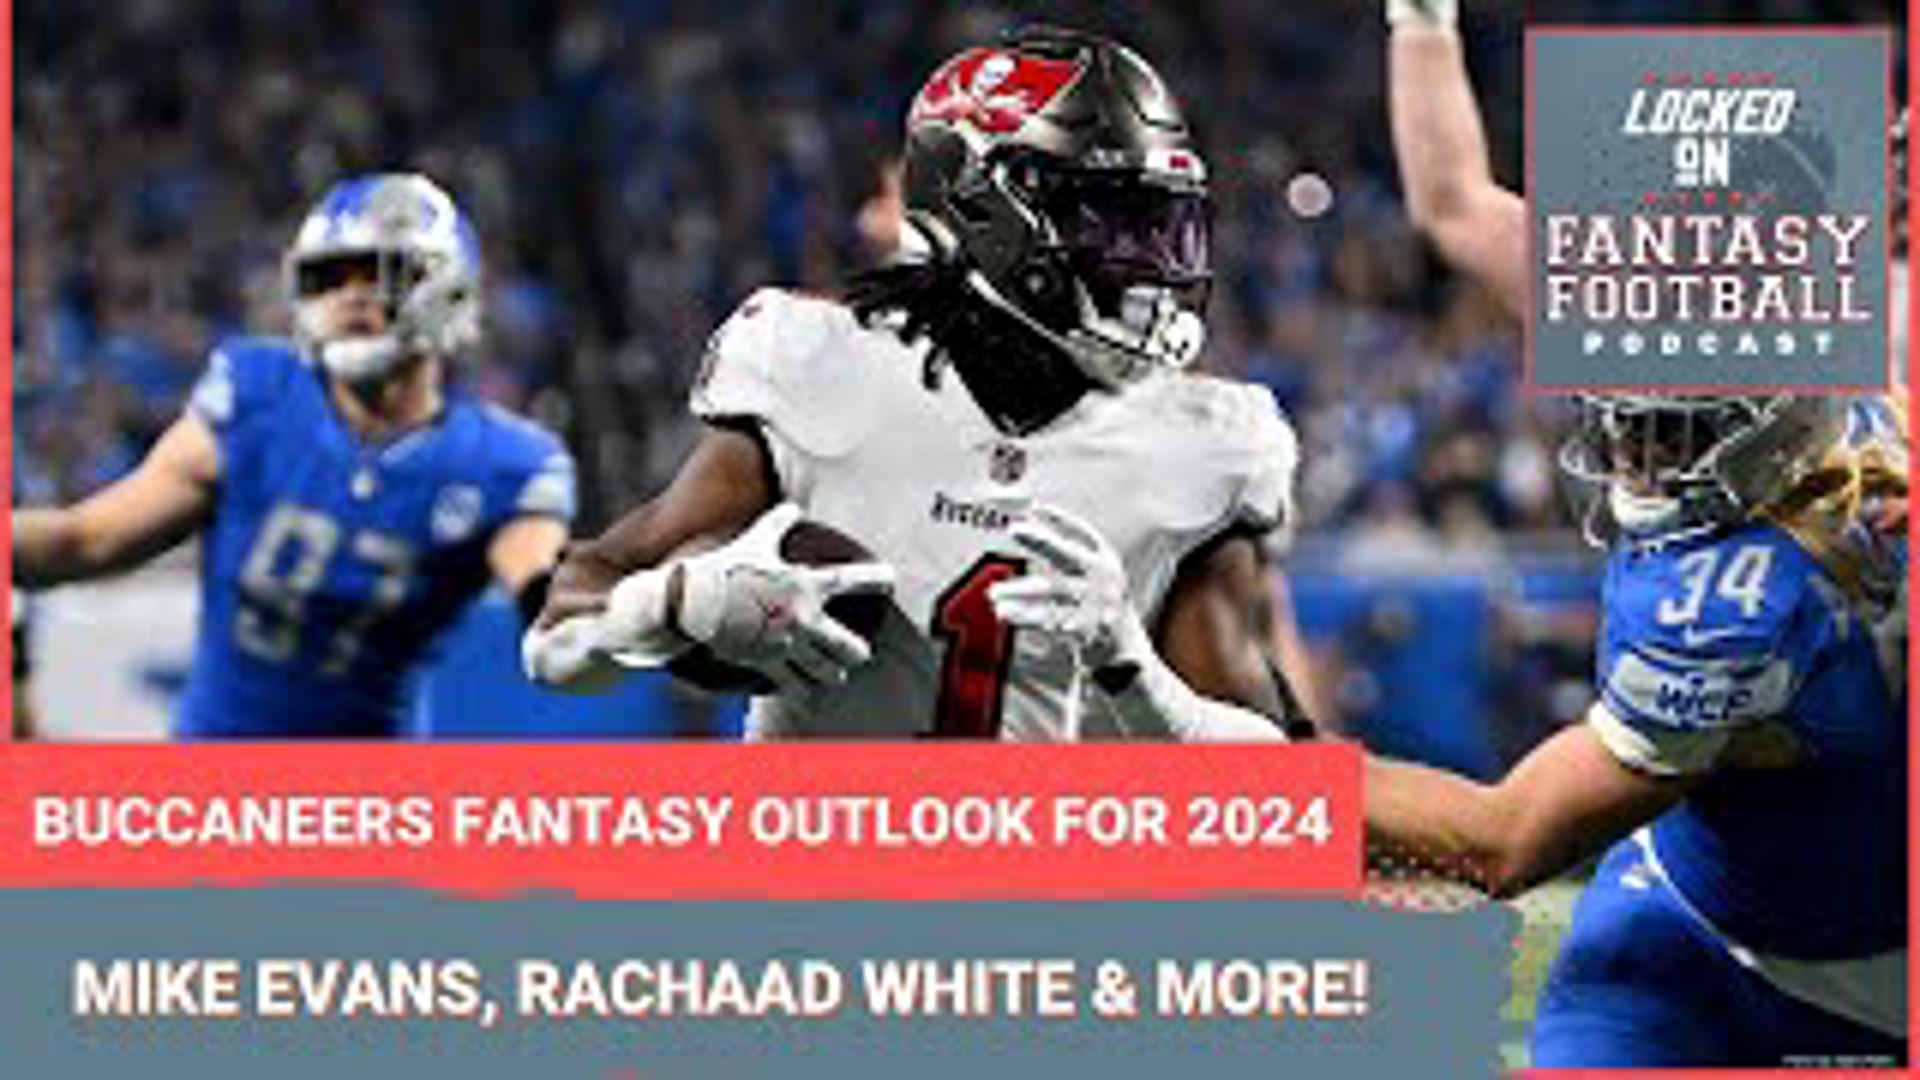 Sporting News.com's Vinnie Iyer and NFL.com's Michelle Magdziuk break down the fantasy football potential of the 2024 Tampa Bay Buccaneers.